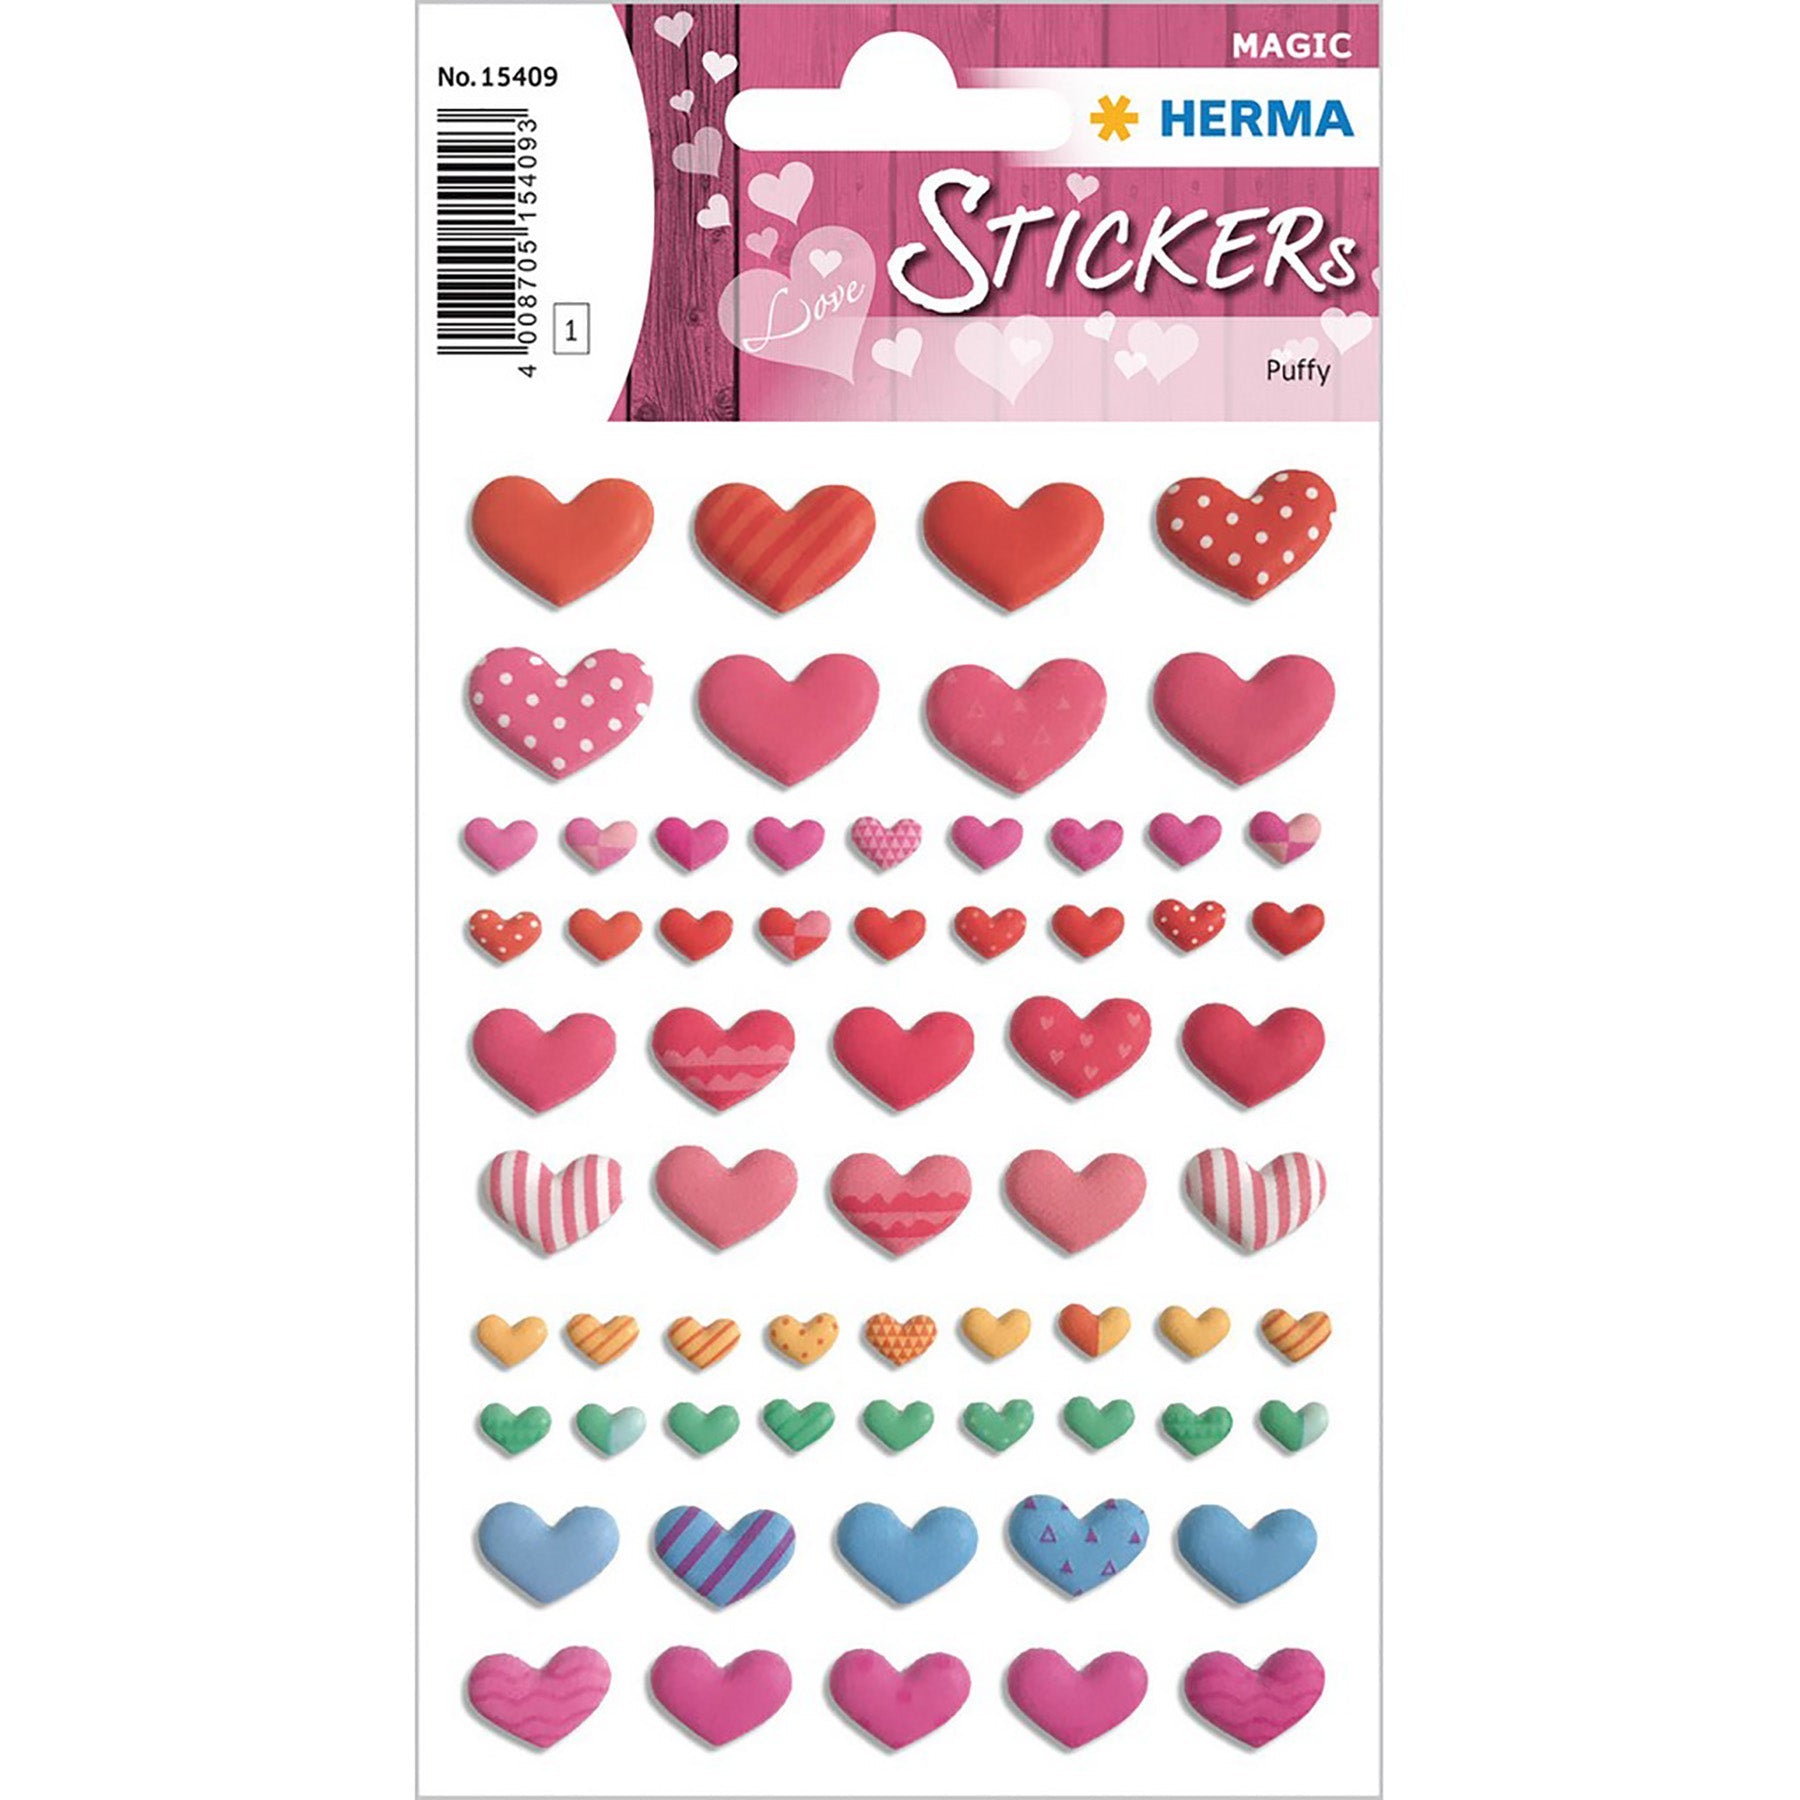 Herma Magic Stickers Happy Colorful Hearts Puffy 4.75x3.1in Sheet